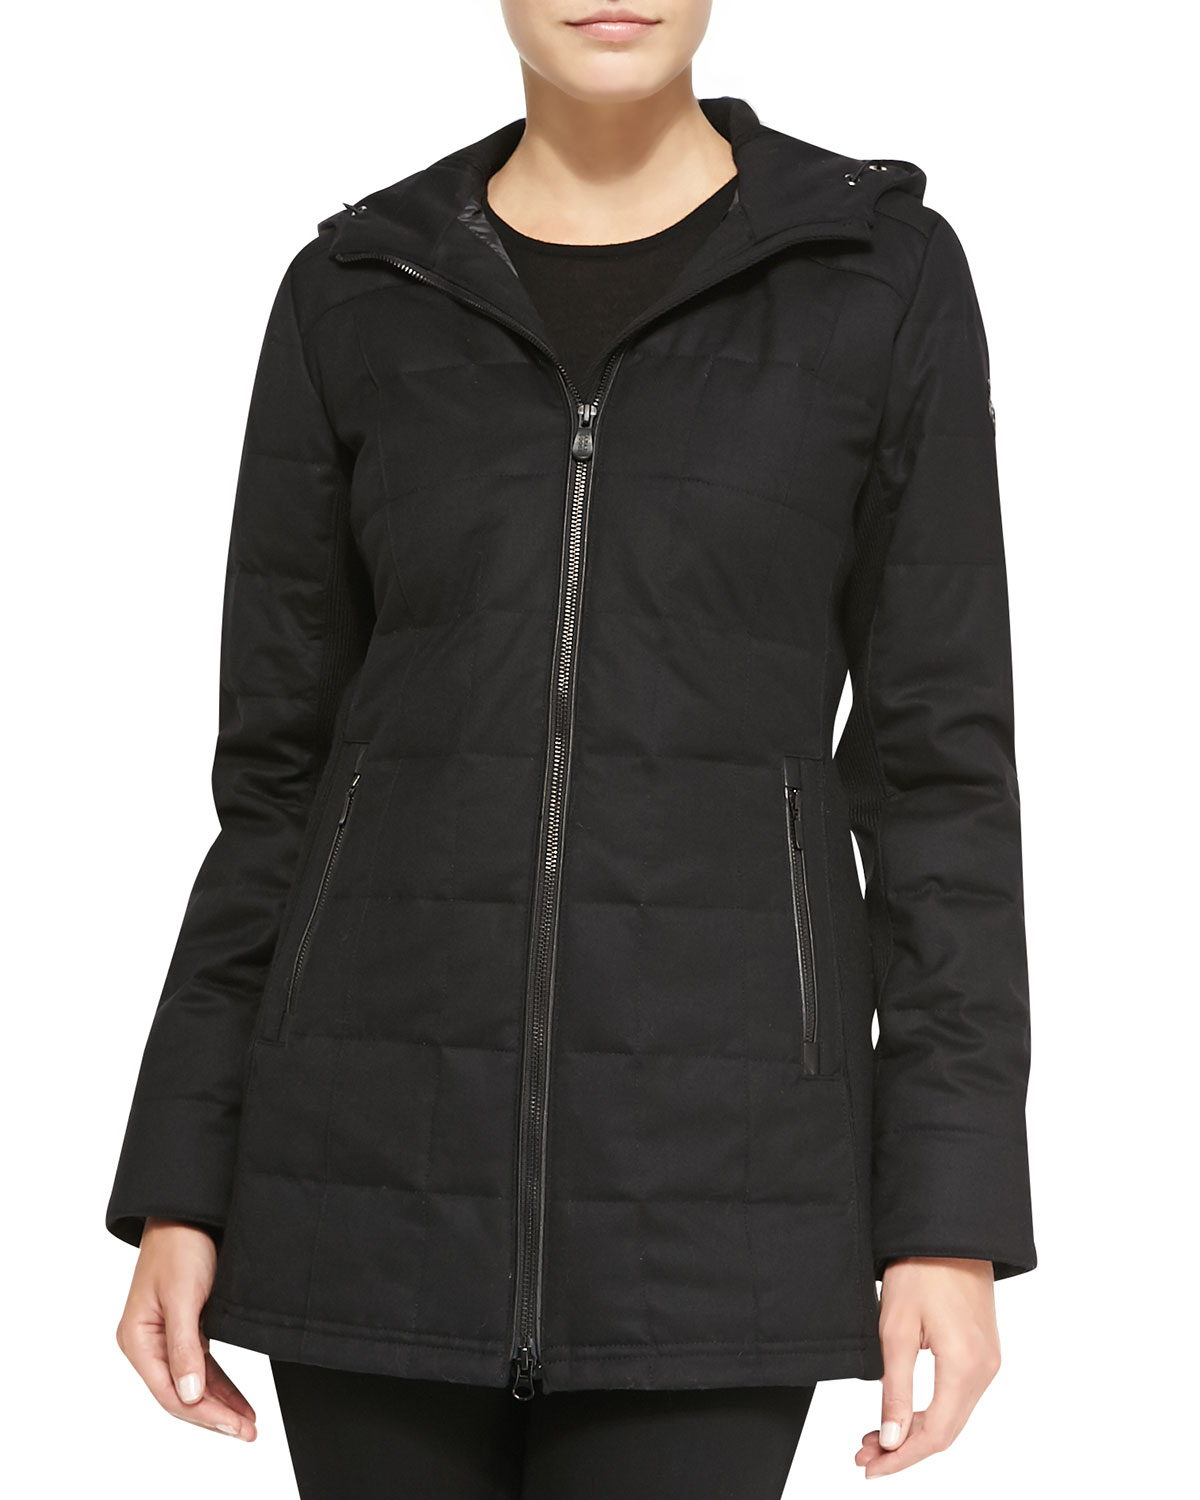 Canada Goose Synthetic Sable Quilted Zip Hoodie in Black - Lyst